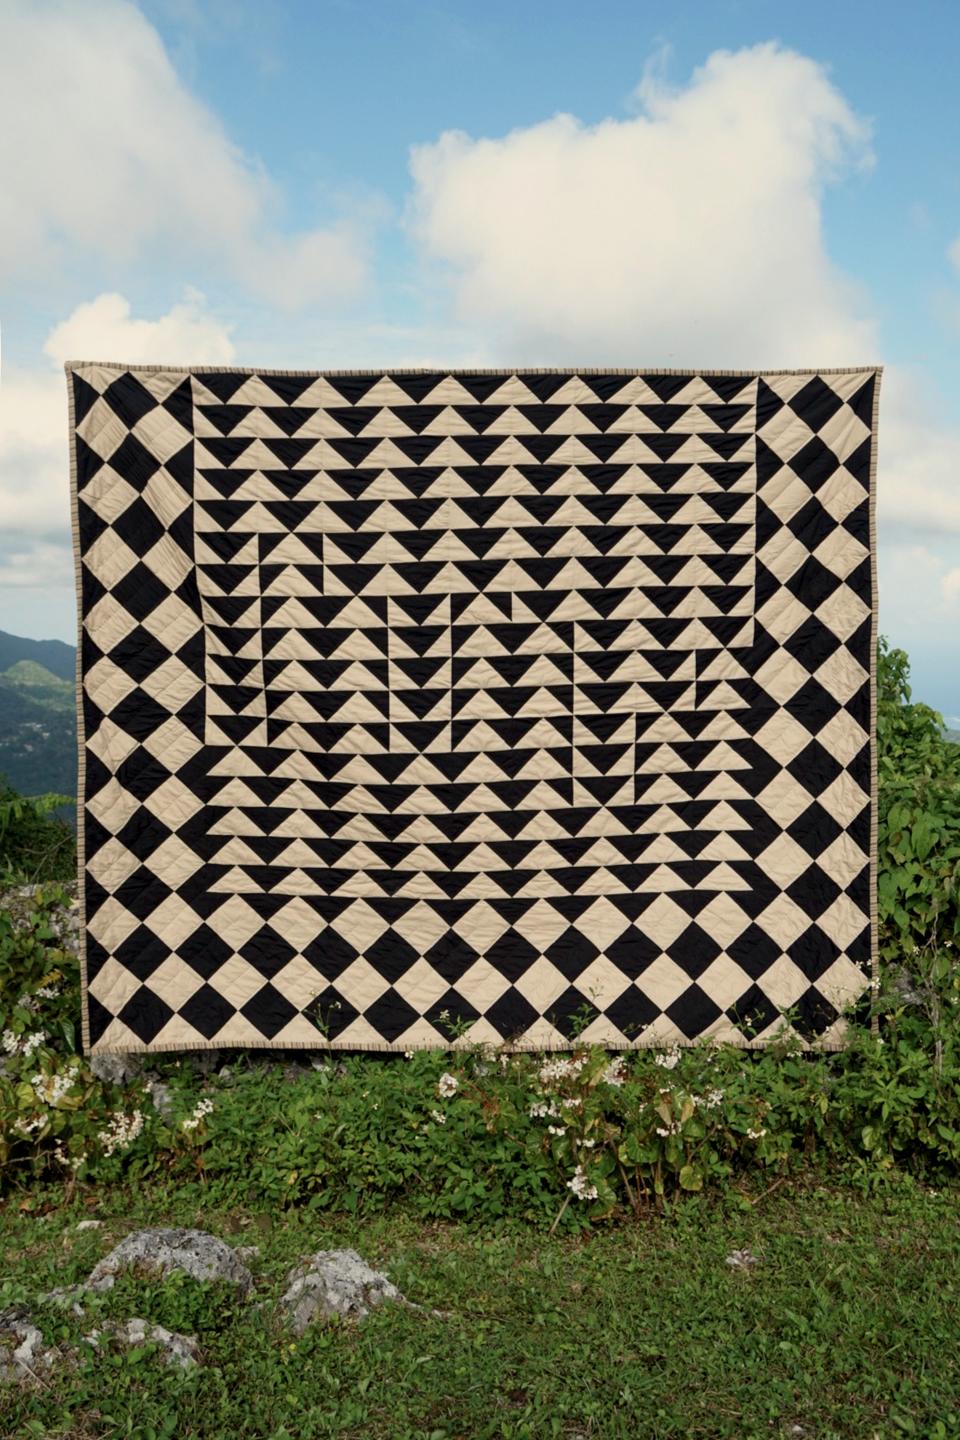 While the pillows were named after Italian musical terms, the quilts were named to sound as if they were classical pieces of music. Seen here is the Sonate quilt.